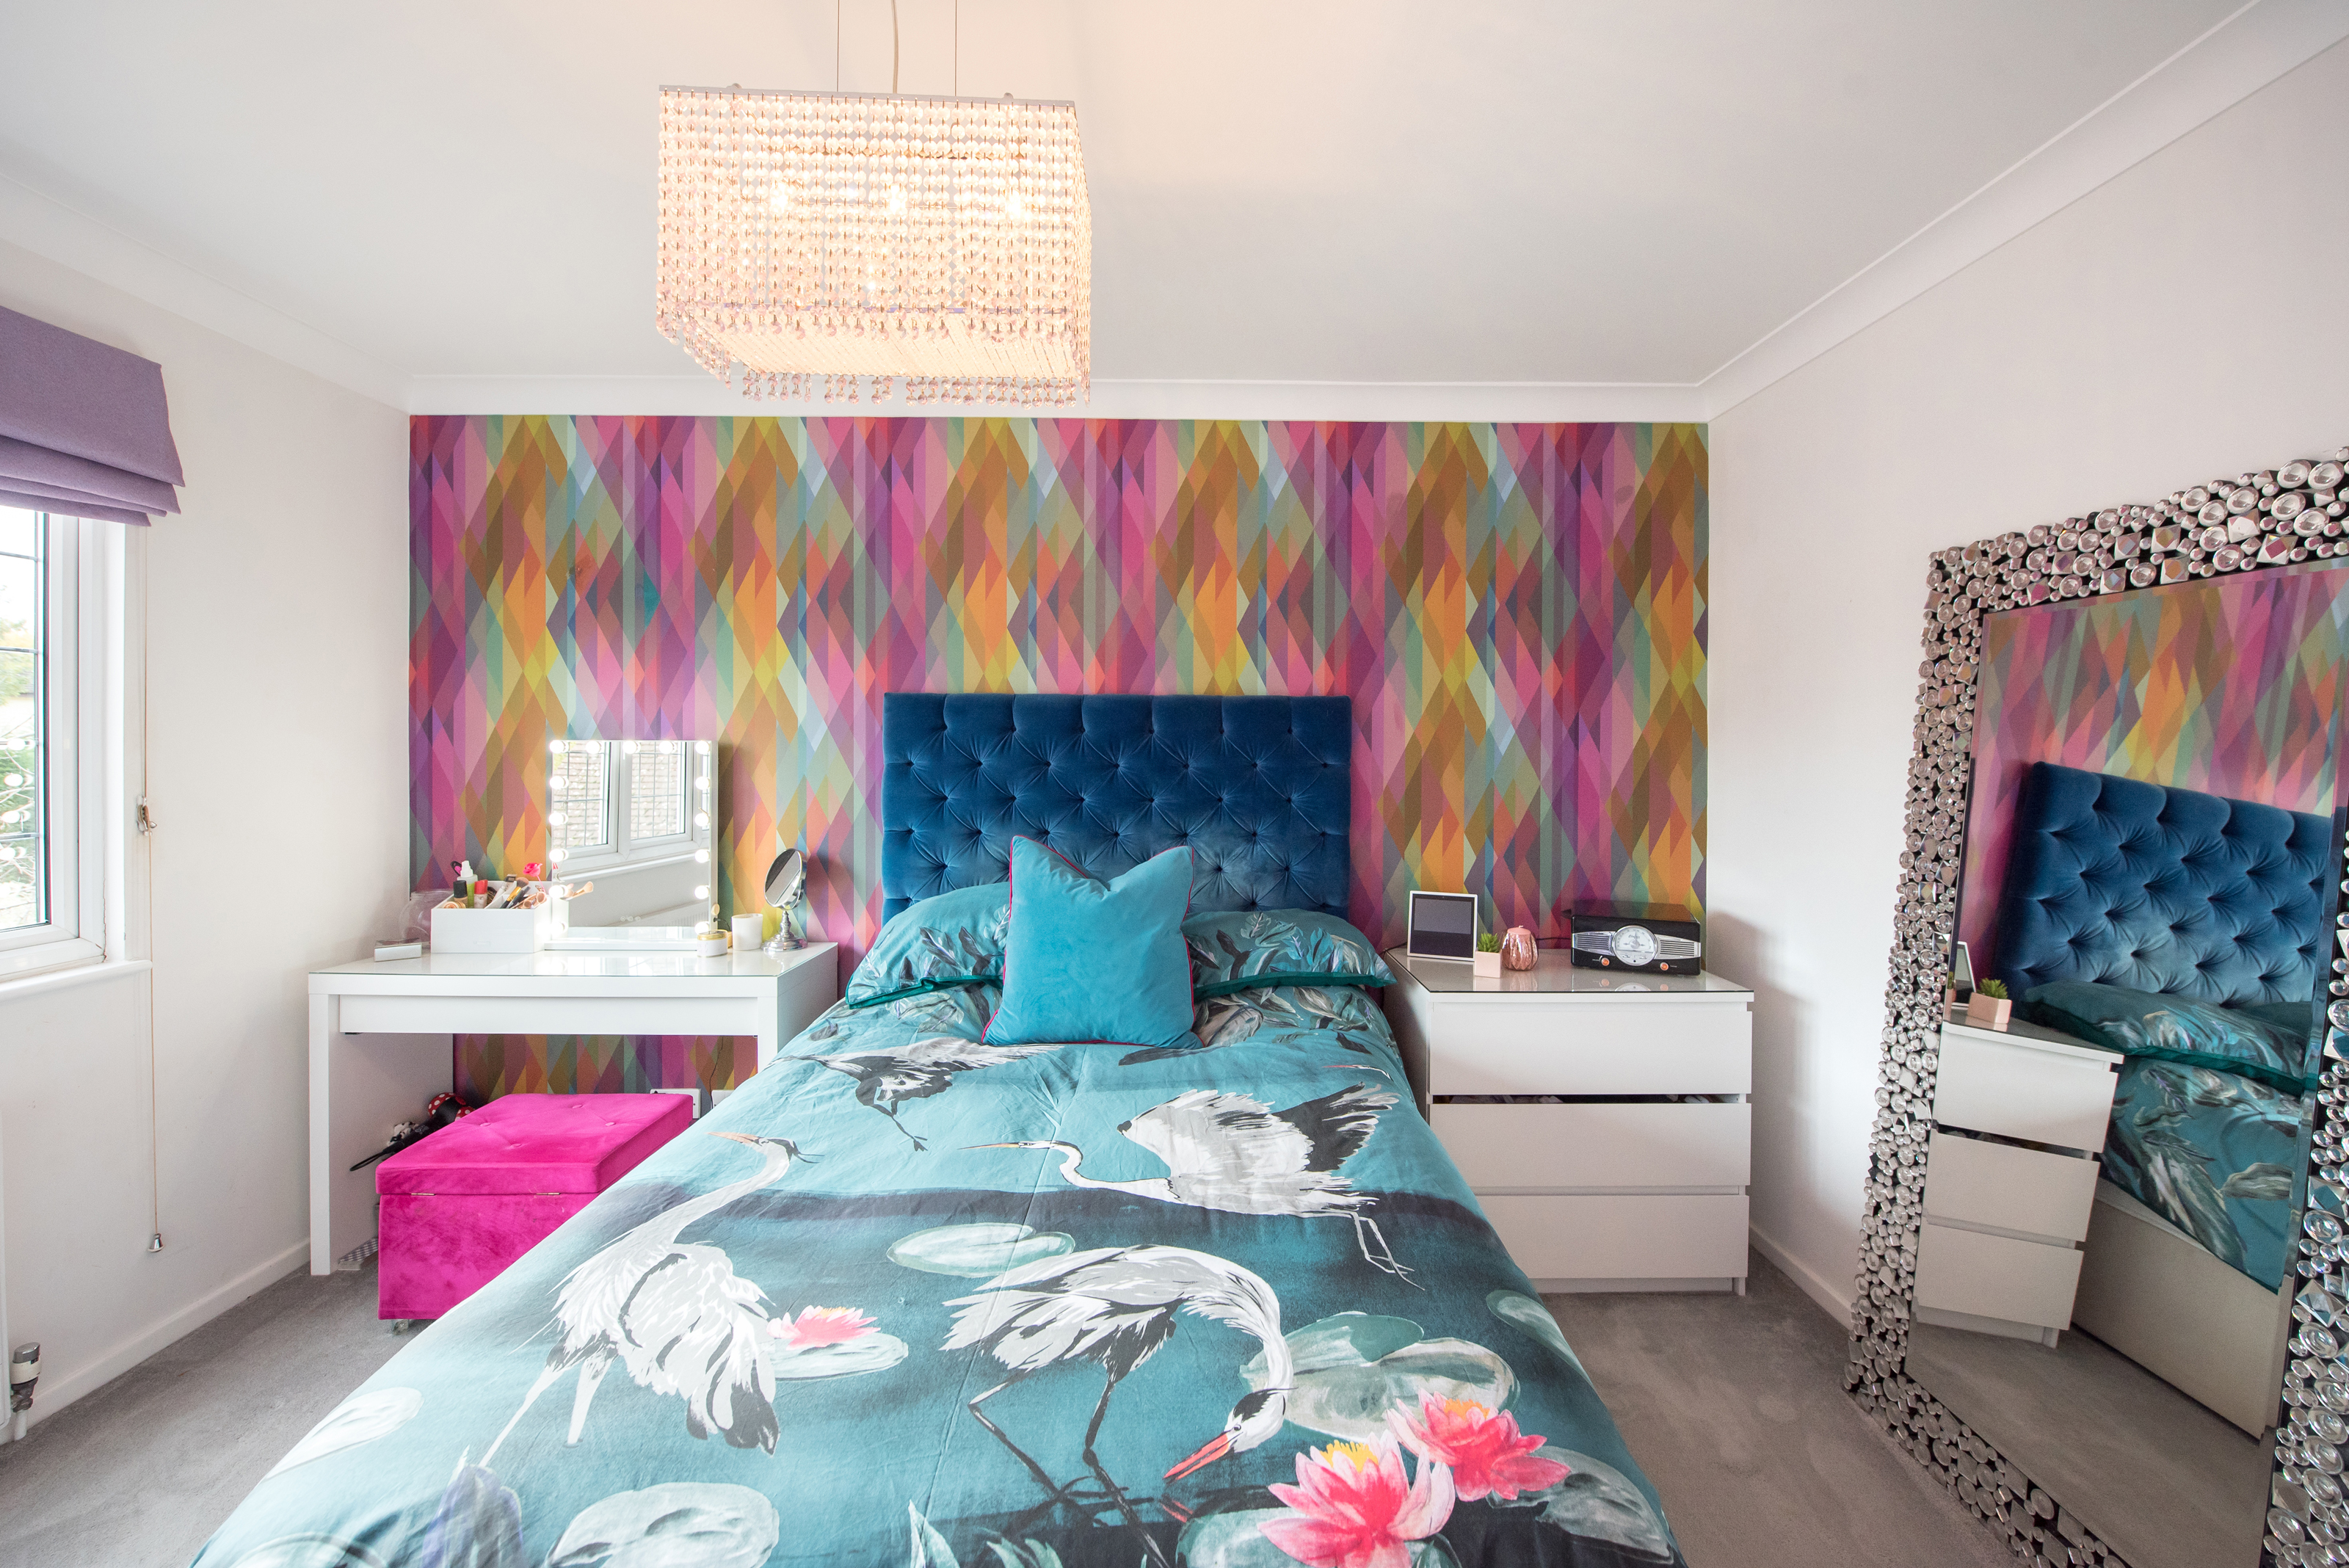 A general interior view of a bedroom, painted white with one wall decorated with a geometrical multicoloured patterned wallpapered, teal buttoned velvet headboard, double bed with floral and Heron bird patterned duvet, large crystal leaner mirror, dressing table with Hollywood makeup vanity light up mirror, chest of drawers, radio and chandelier